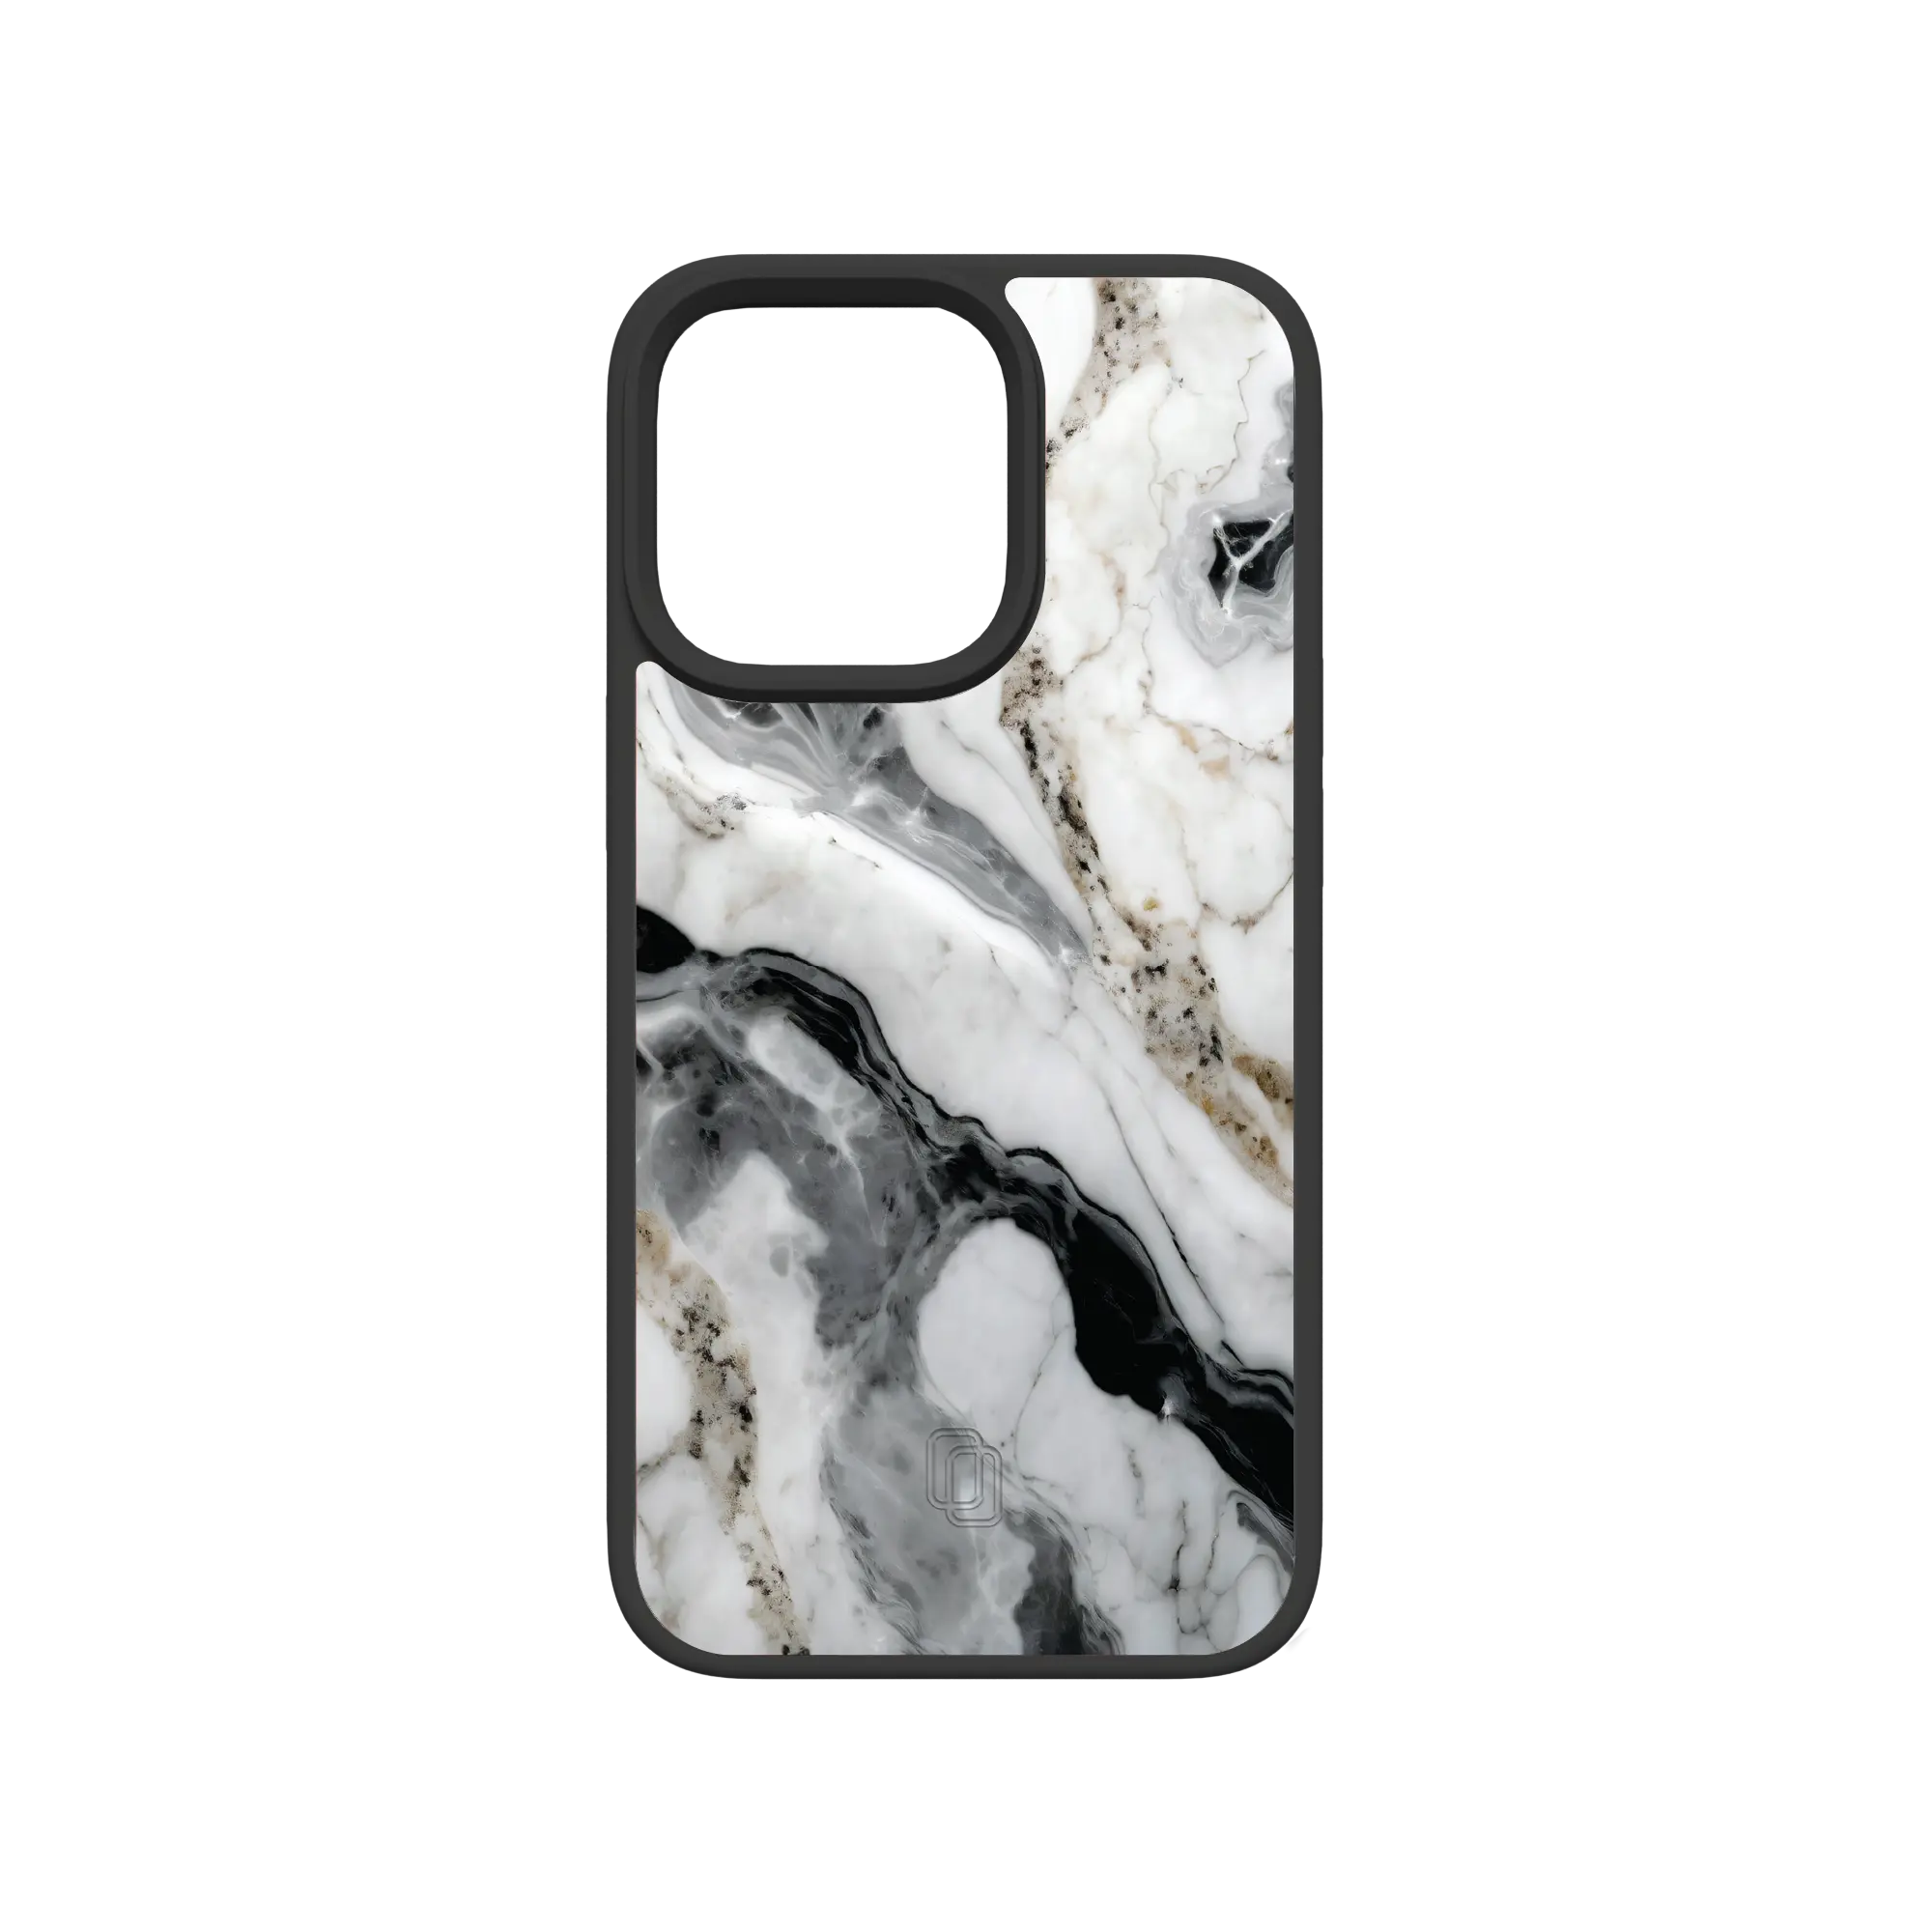 Apple-iPhone-13-Pro-Crystal-Clear Pure Snow | Protective MagSafe White Marble Case | Marble Stone Series for Apple iPhone 13 Series cellhelmet cellhelmet